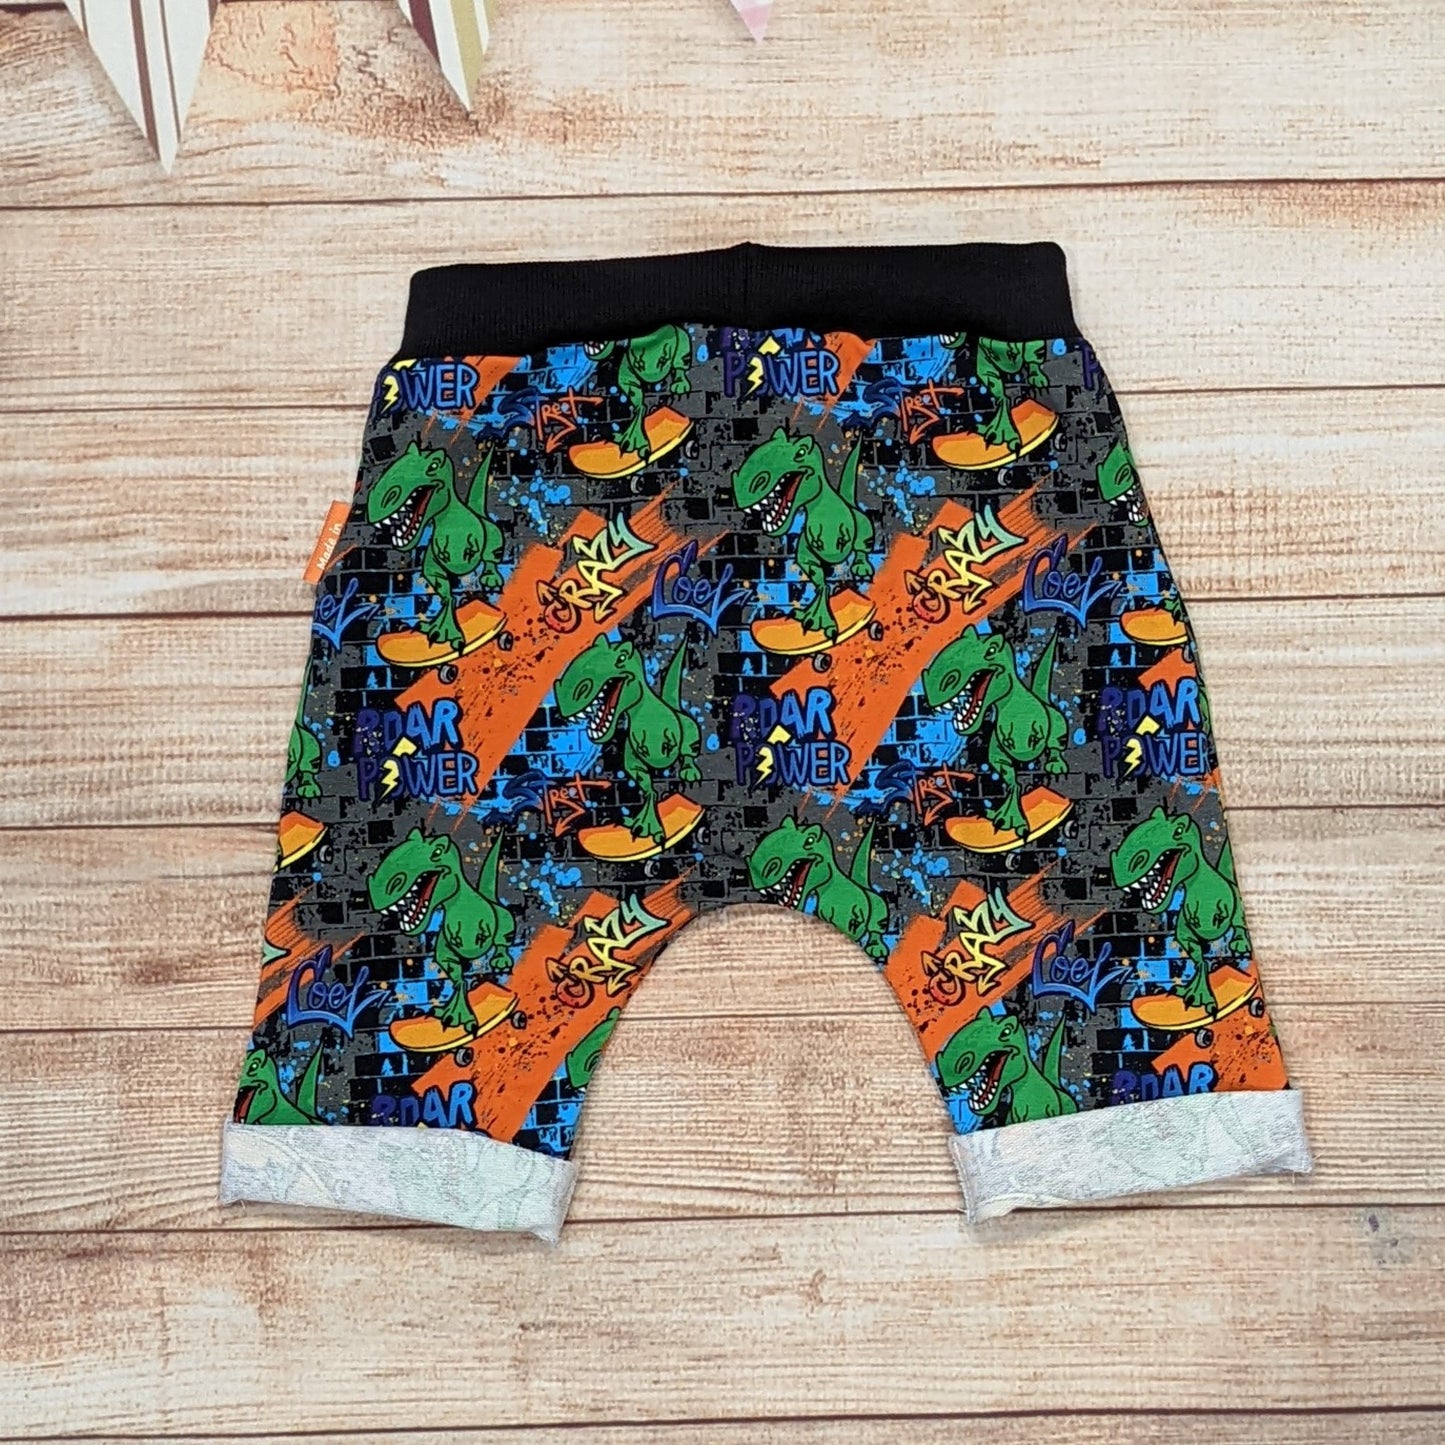 The insanely fun skateboarding dinosaurs harem shorts. Handmade using street dino cotton French terry and black cotton ribbing. Shown from the rear.